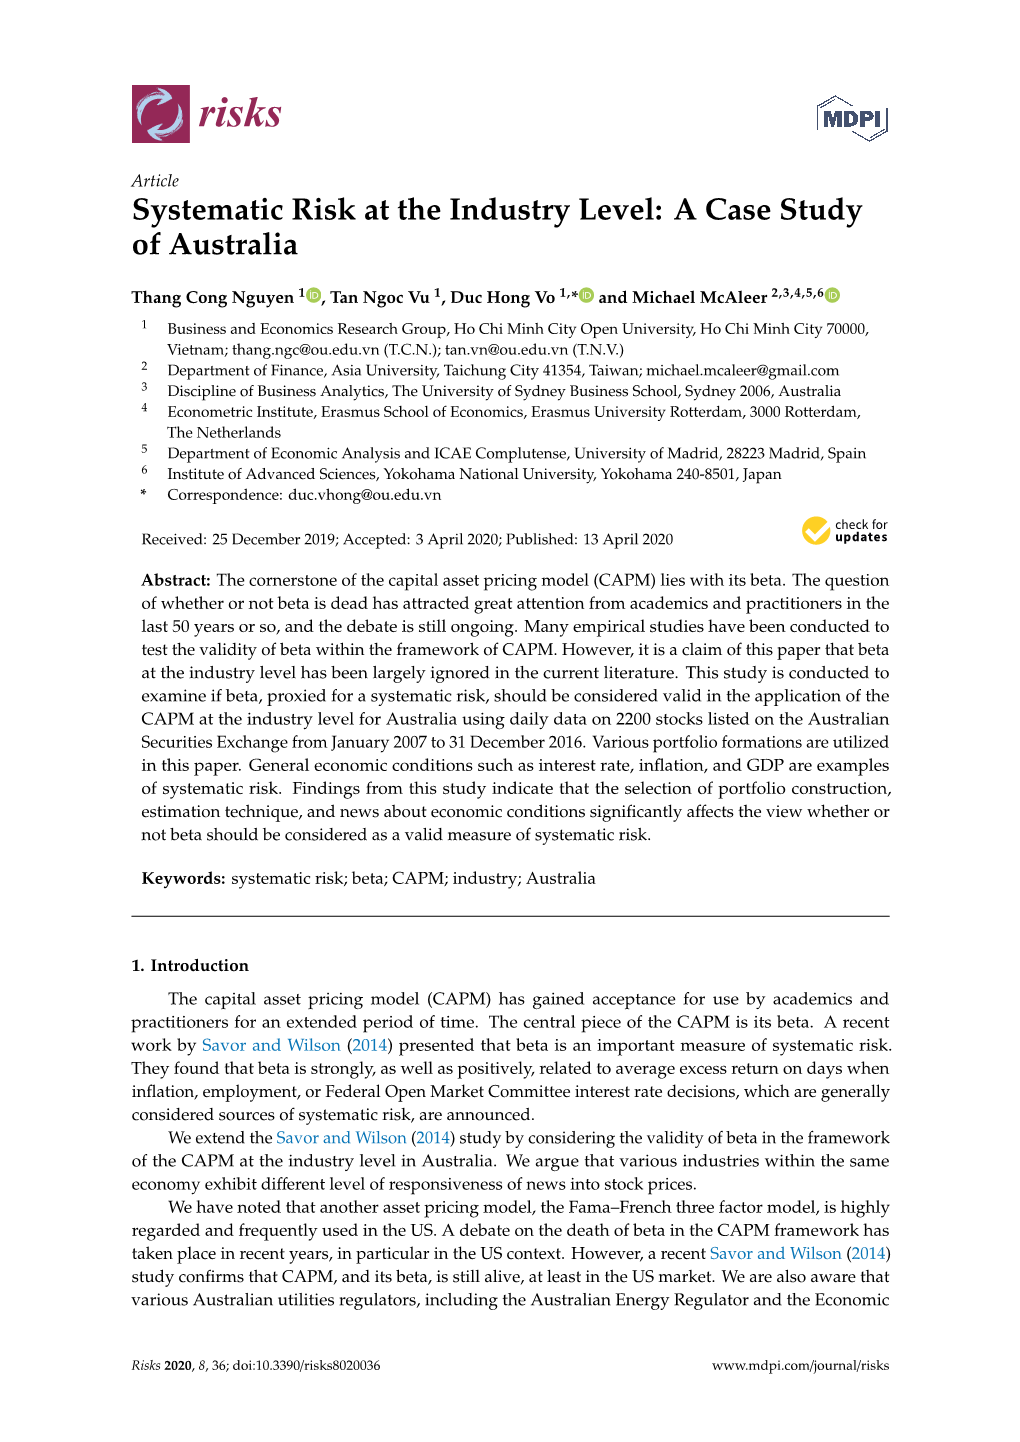 Systematic Risk at the Industry Level: a Case Study of Australia